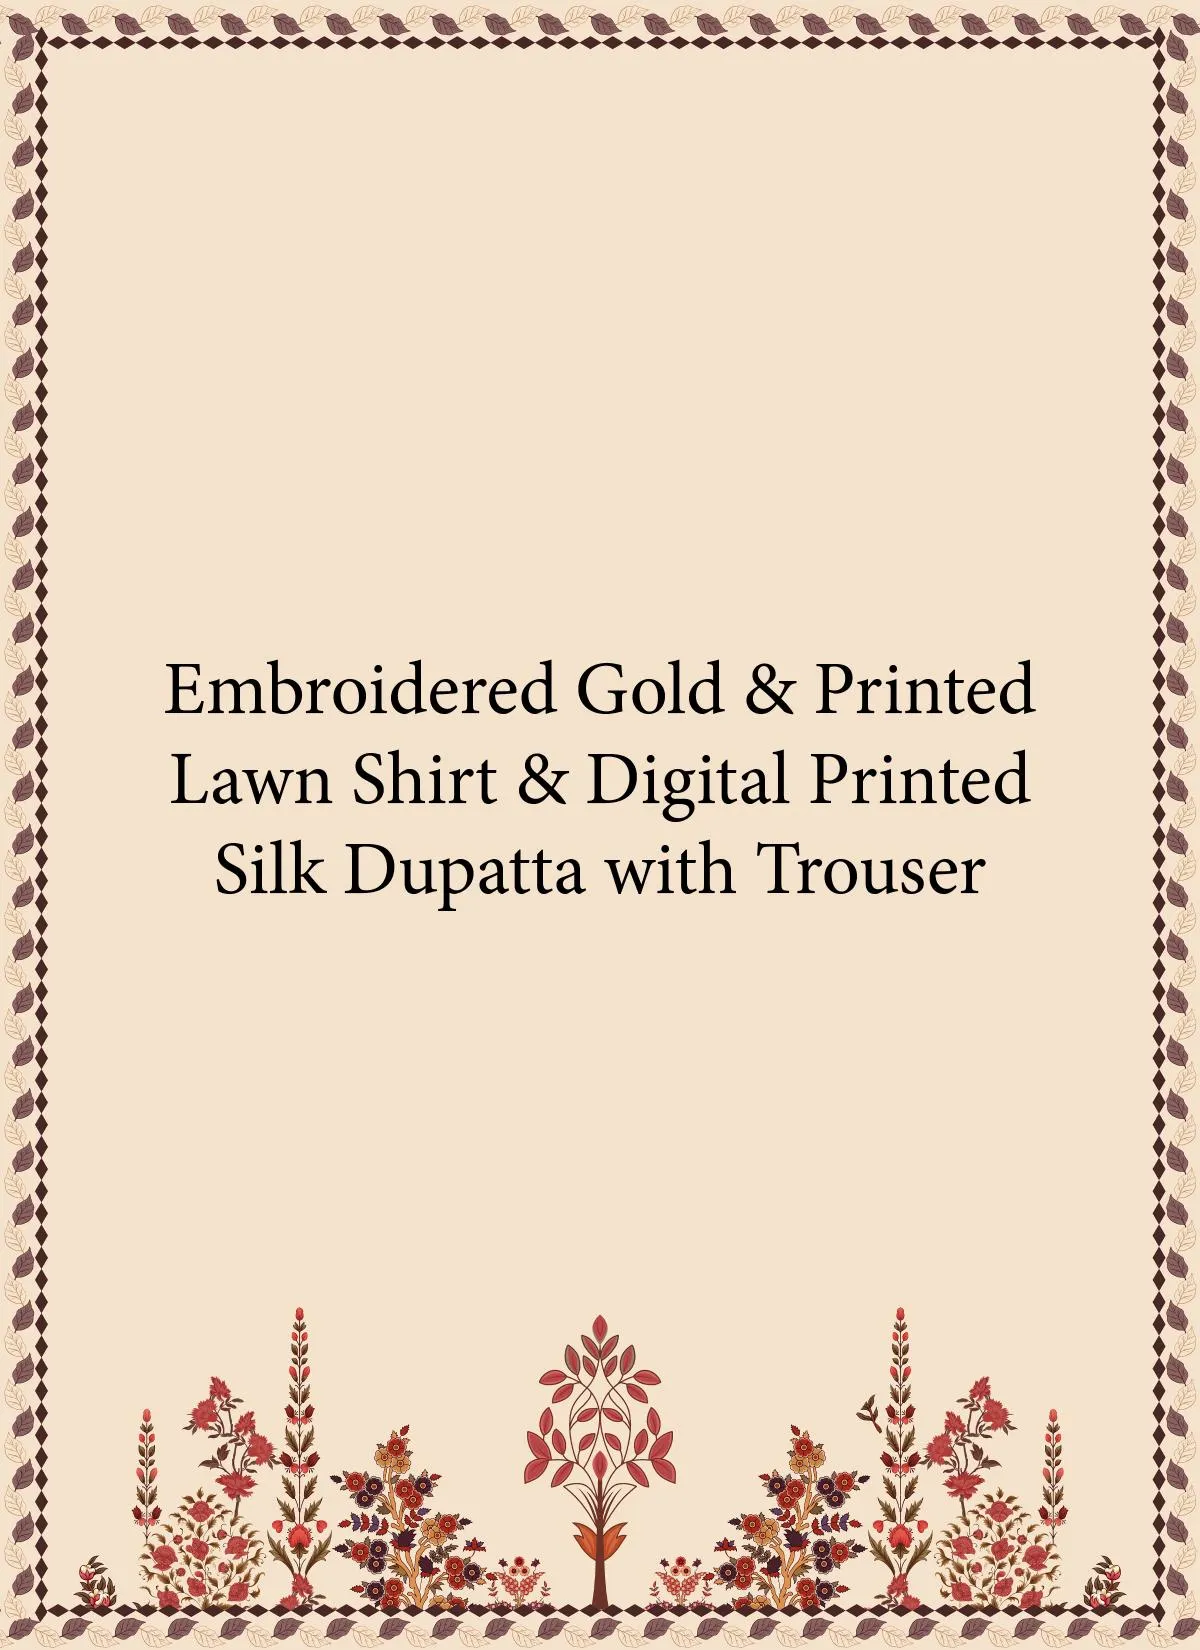 Embroidered gold and printed lawn shirt and digital printed silk dupatta with trouser